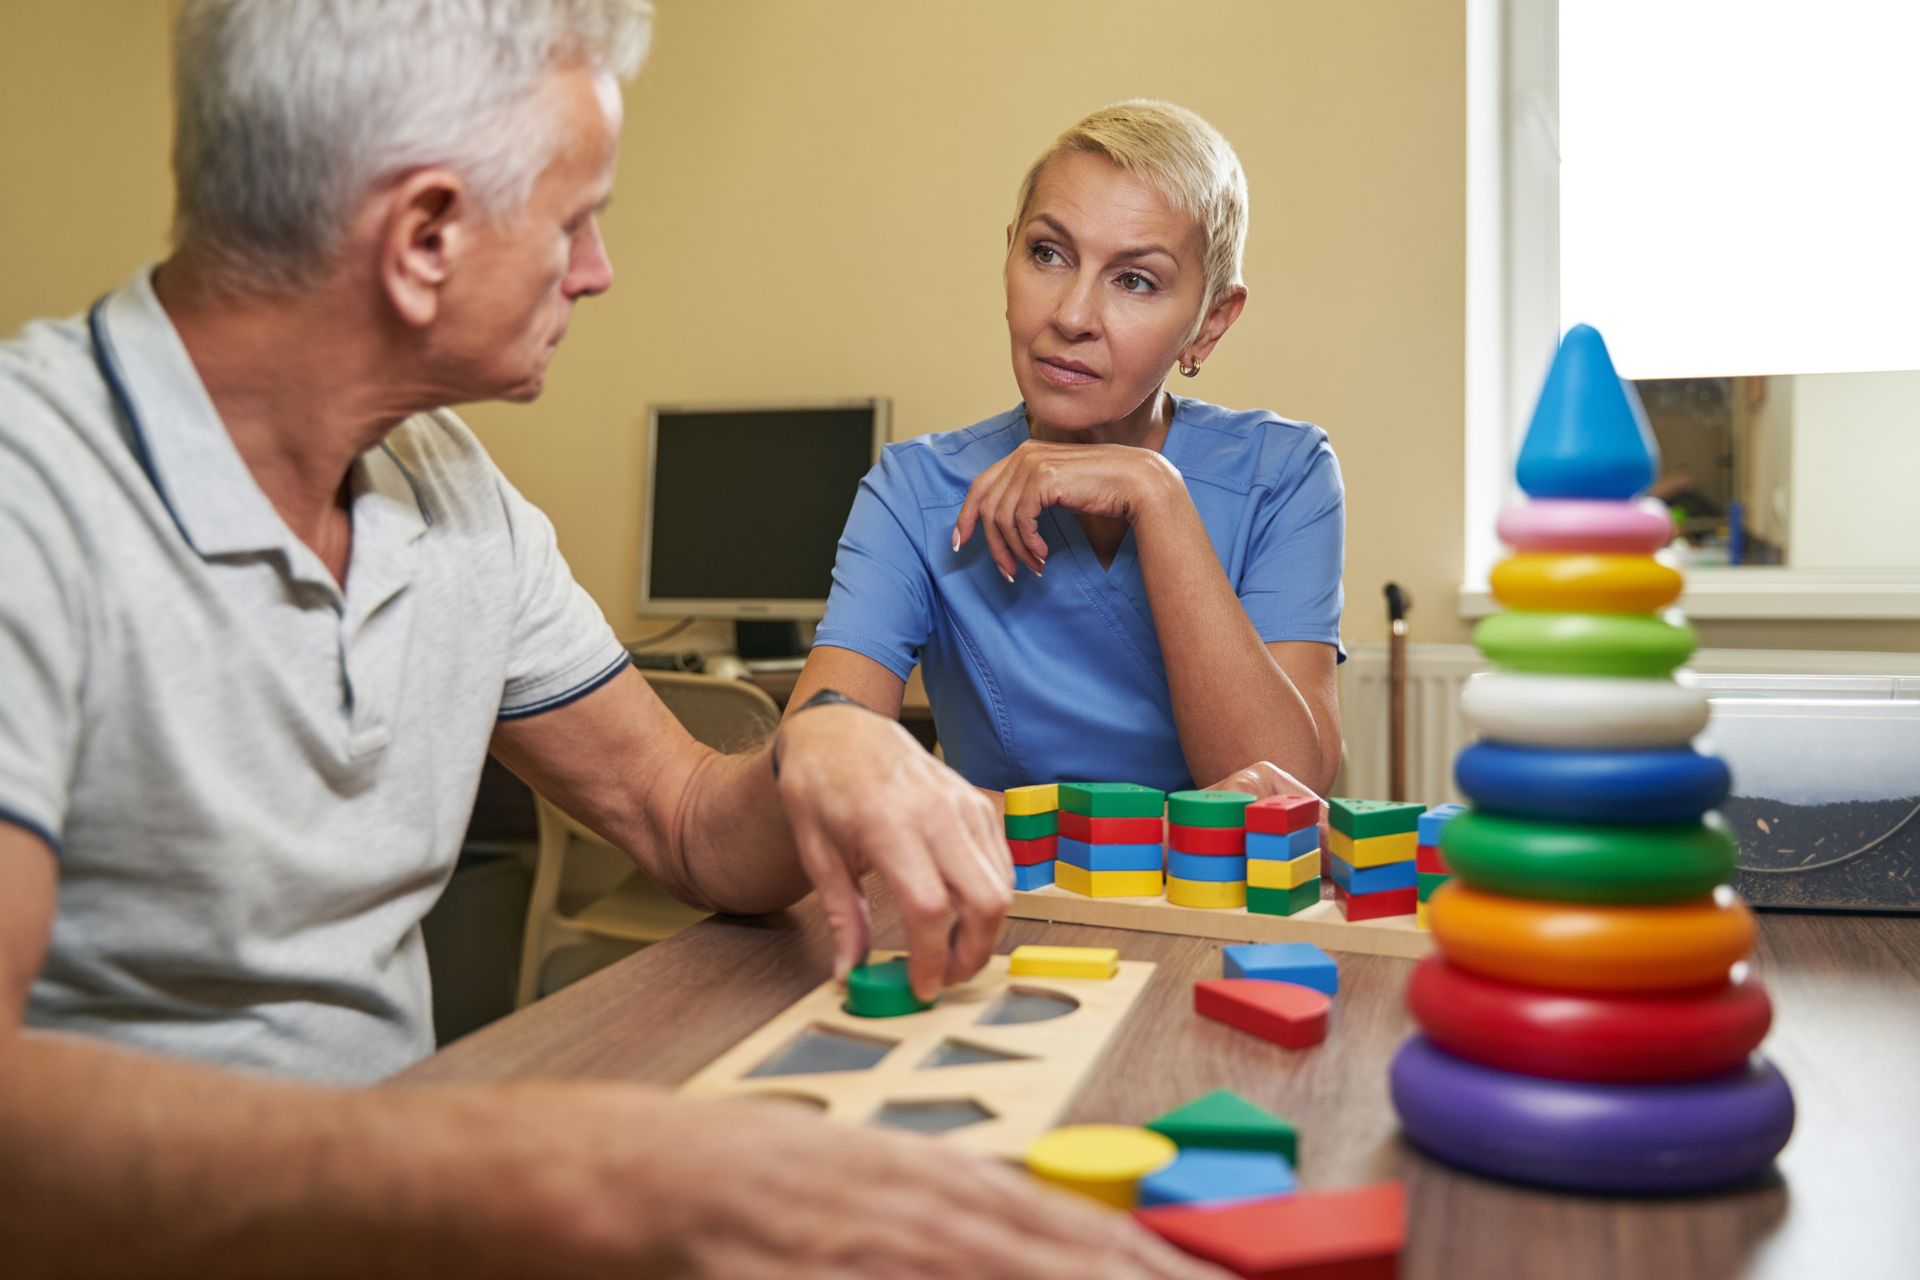 Blonde nurse with a pixie cut, wearing light blue scrubs, sitting next to an elderly man with gray hair, dressed in a white shirt, while engaging in toy figure therapy for cognitive stimulation.